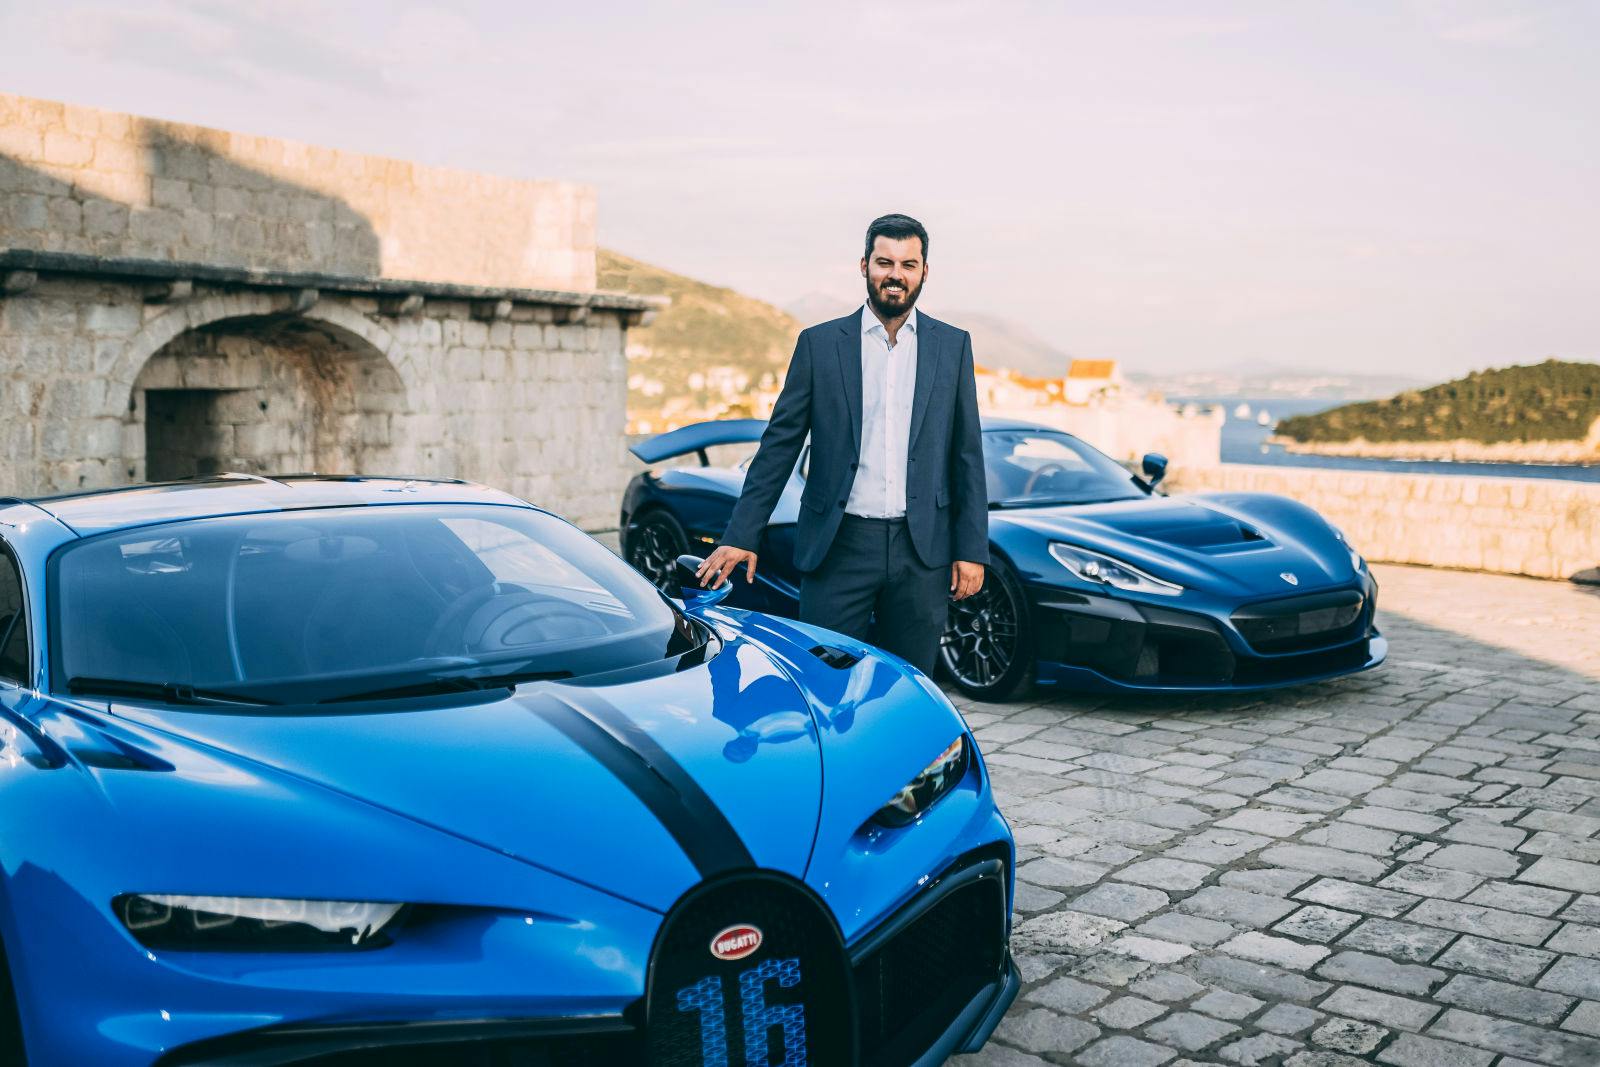 Mate Rimac next to a Bugatti Chiron Pur Sport, founder of Rimac Automobili, is now CEO of the new joint company Bugatti-Rimac.